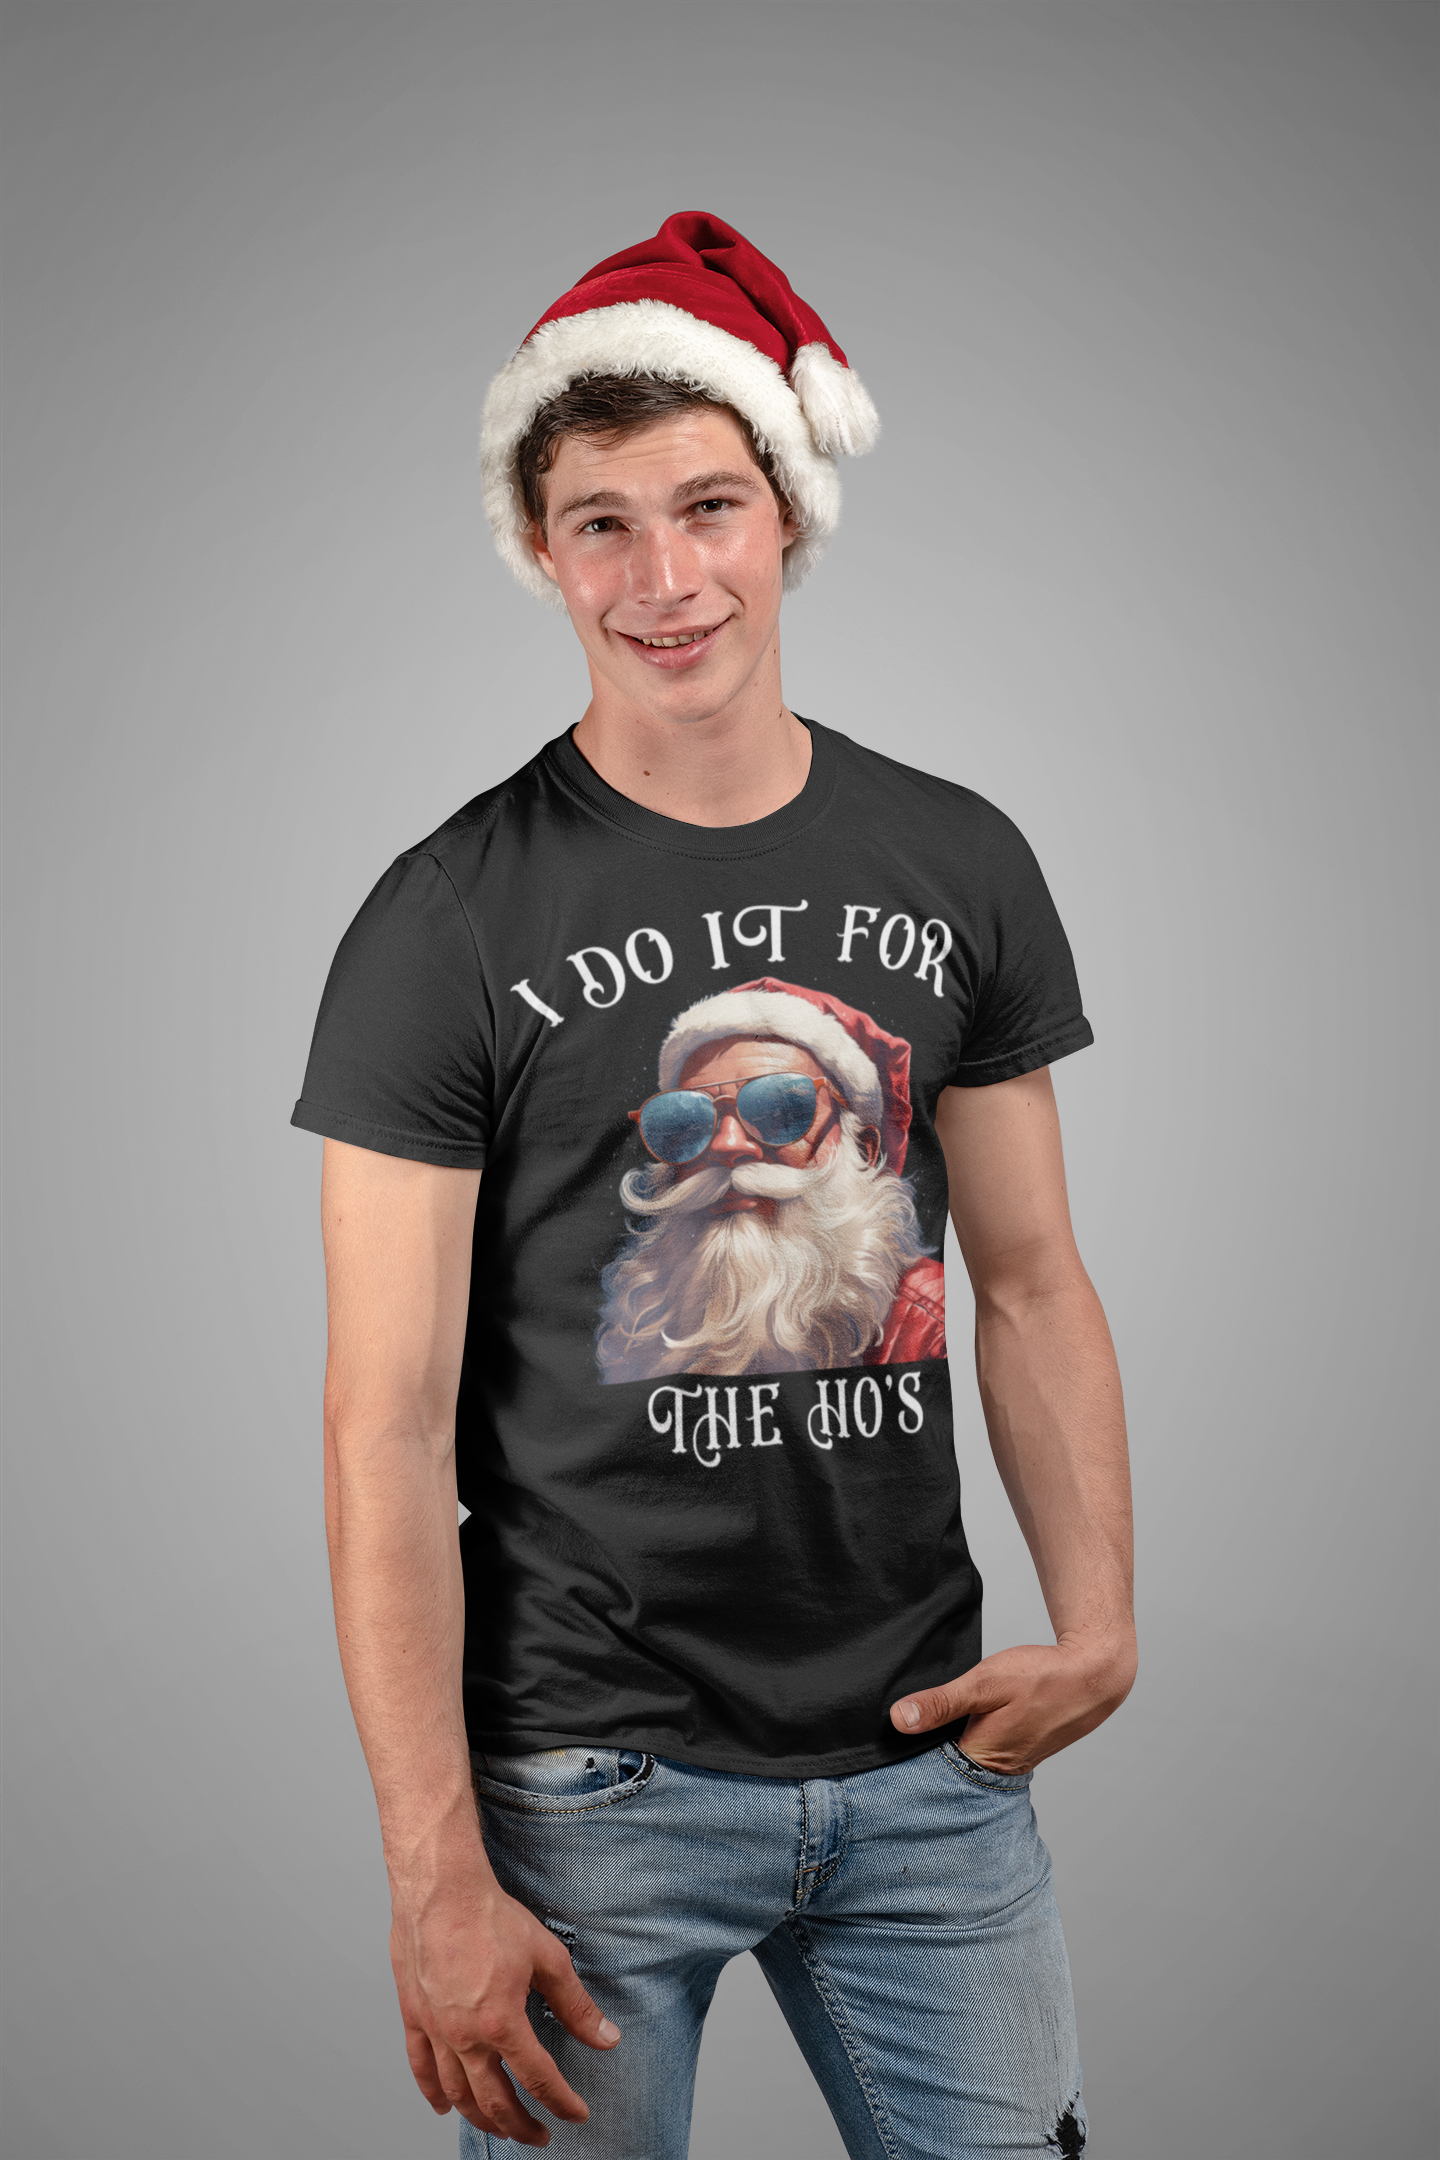 T-SHIRT - FOR THE HO'S